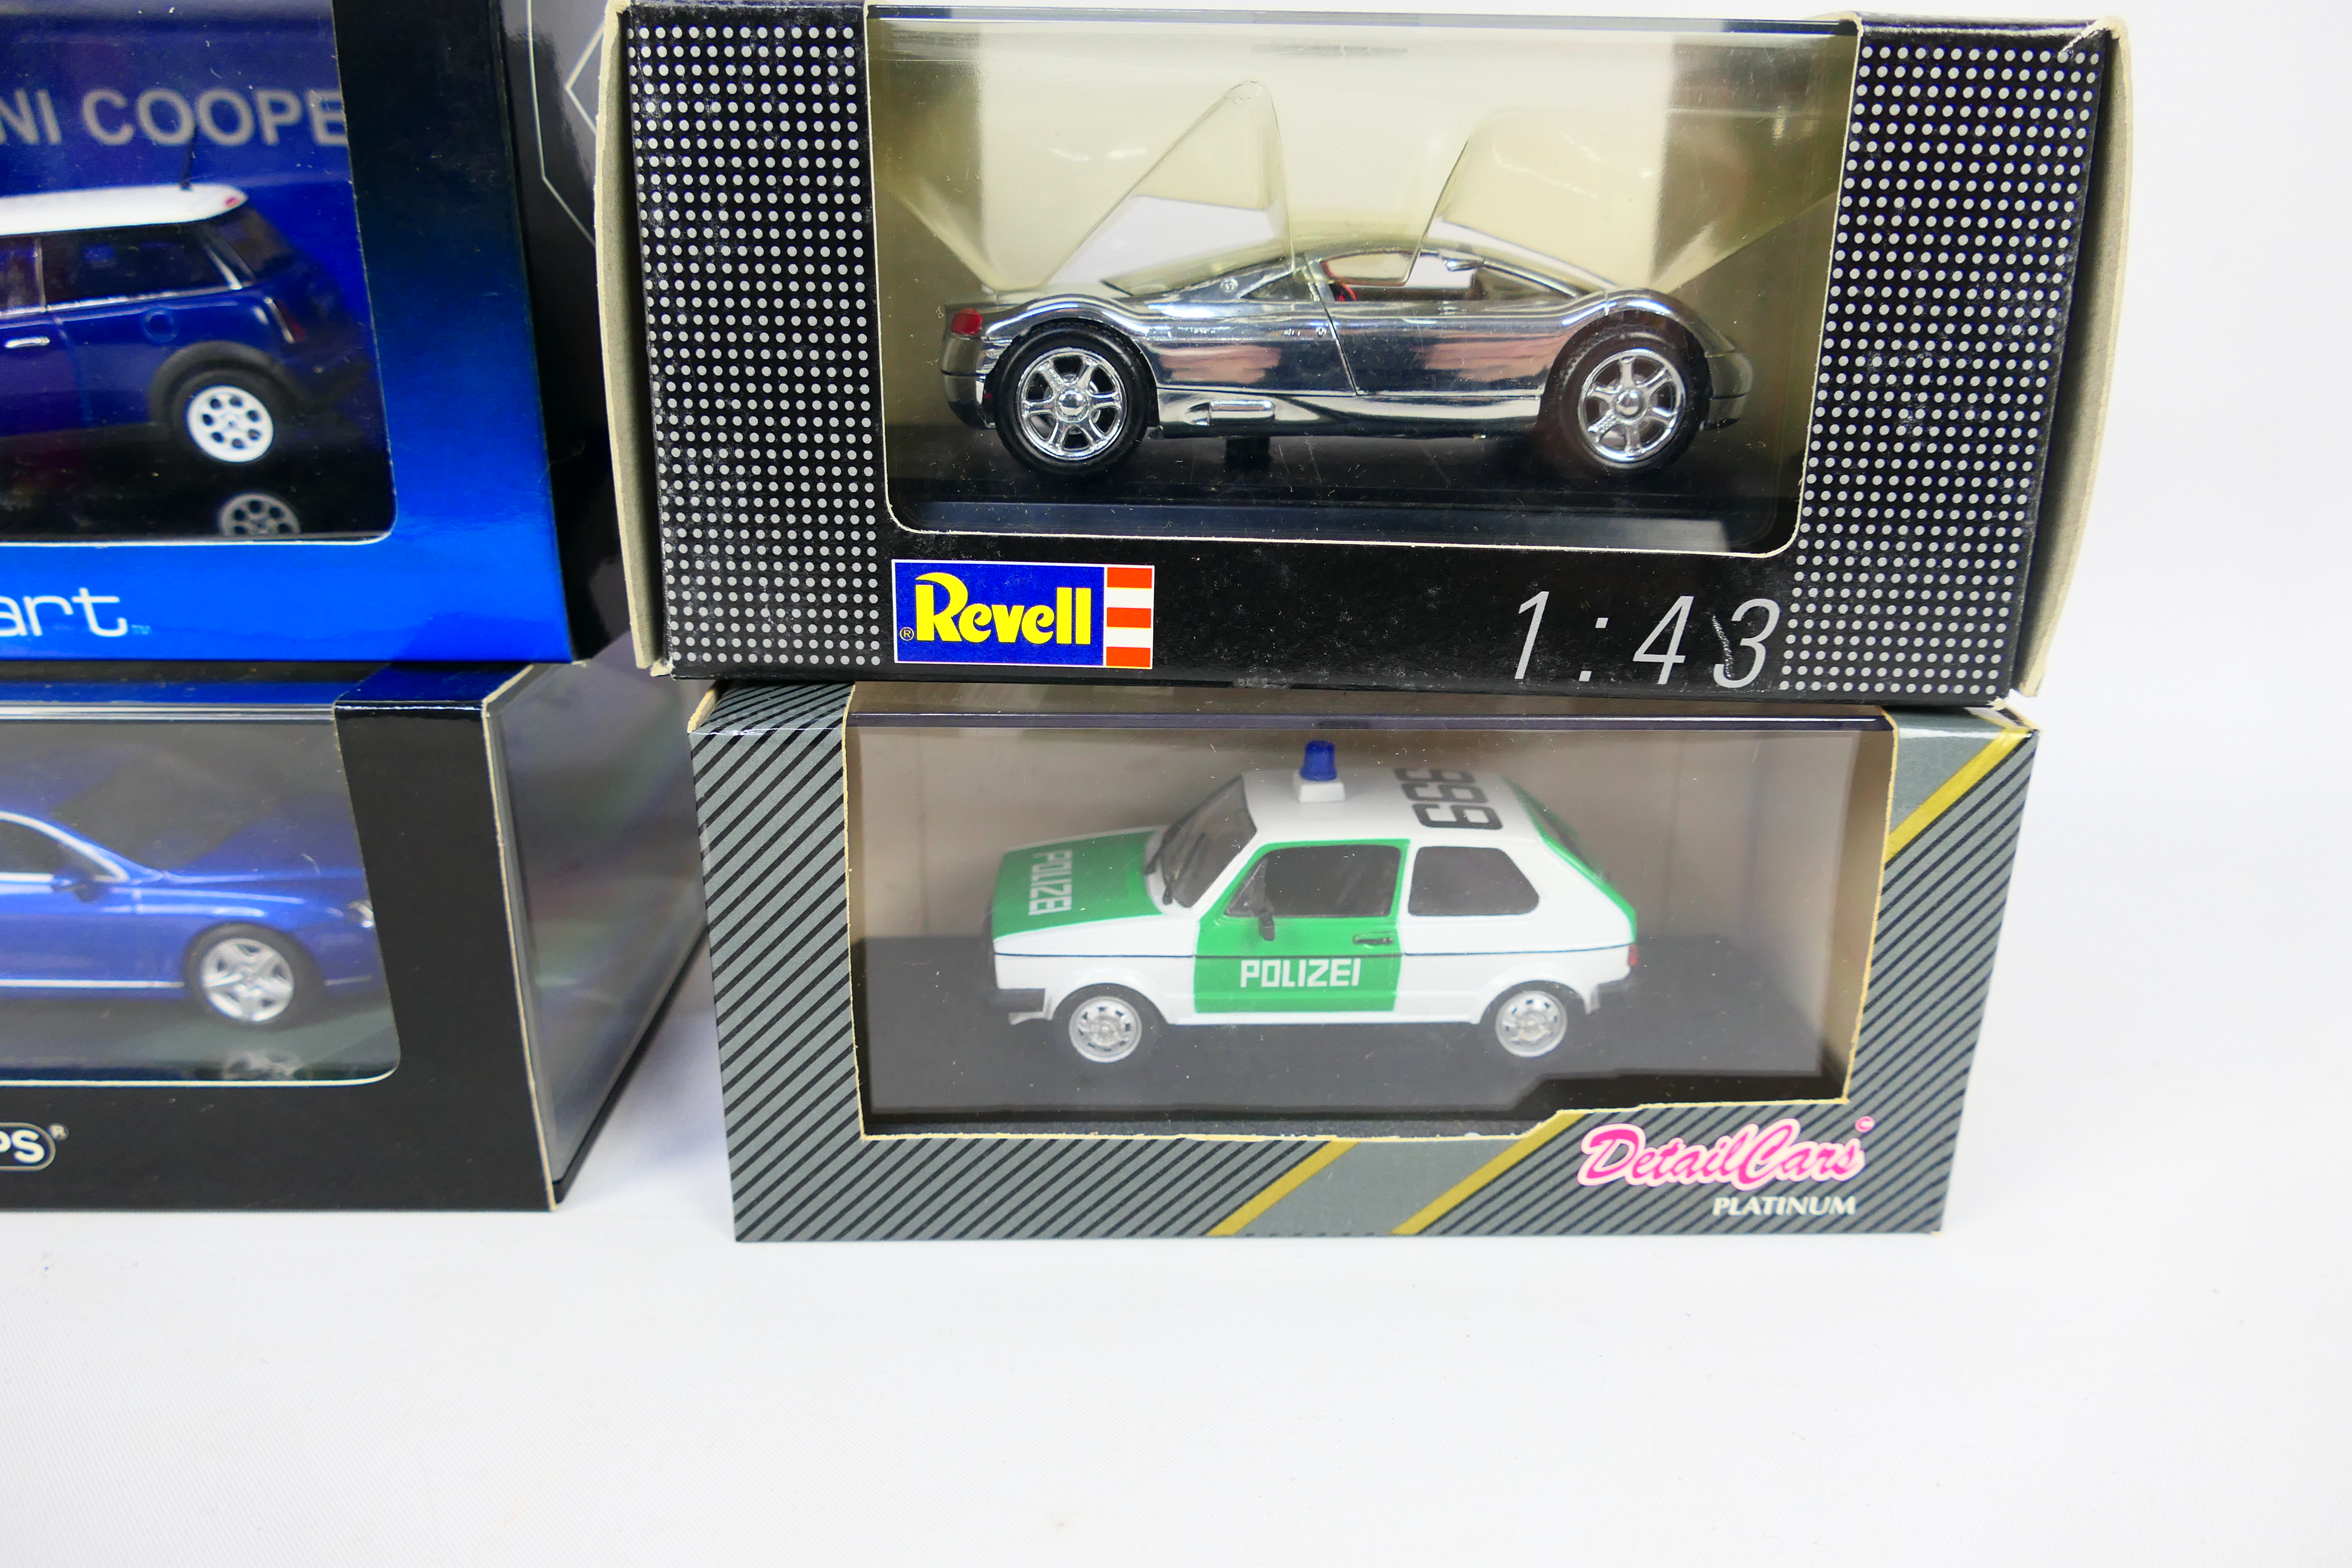 Minichamps - AutoArt - Revell - Detail Cars - Six boxed diecast 1:43 scale model vehicles. - Image 7 of 10